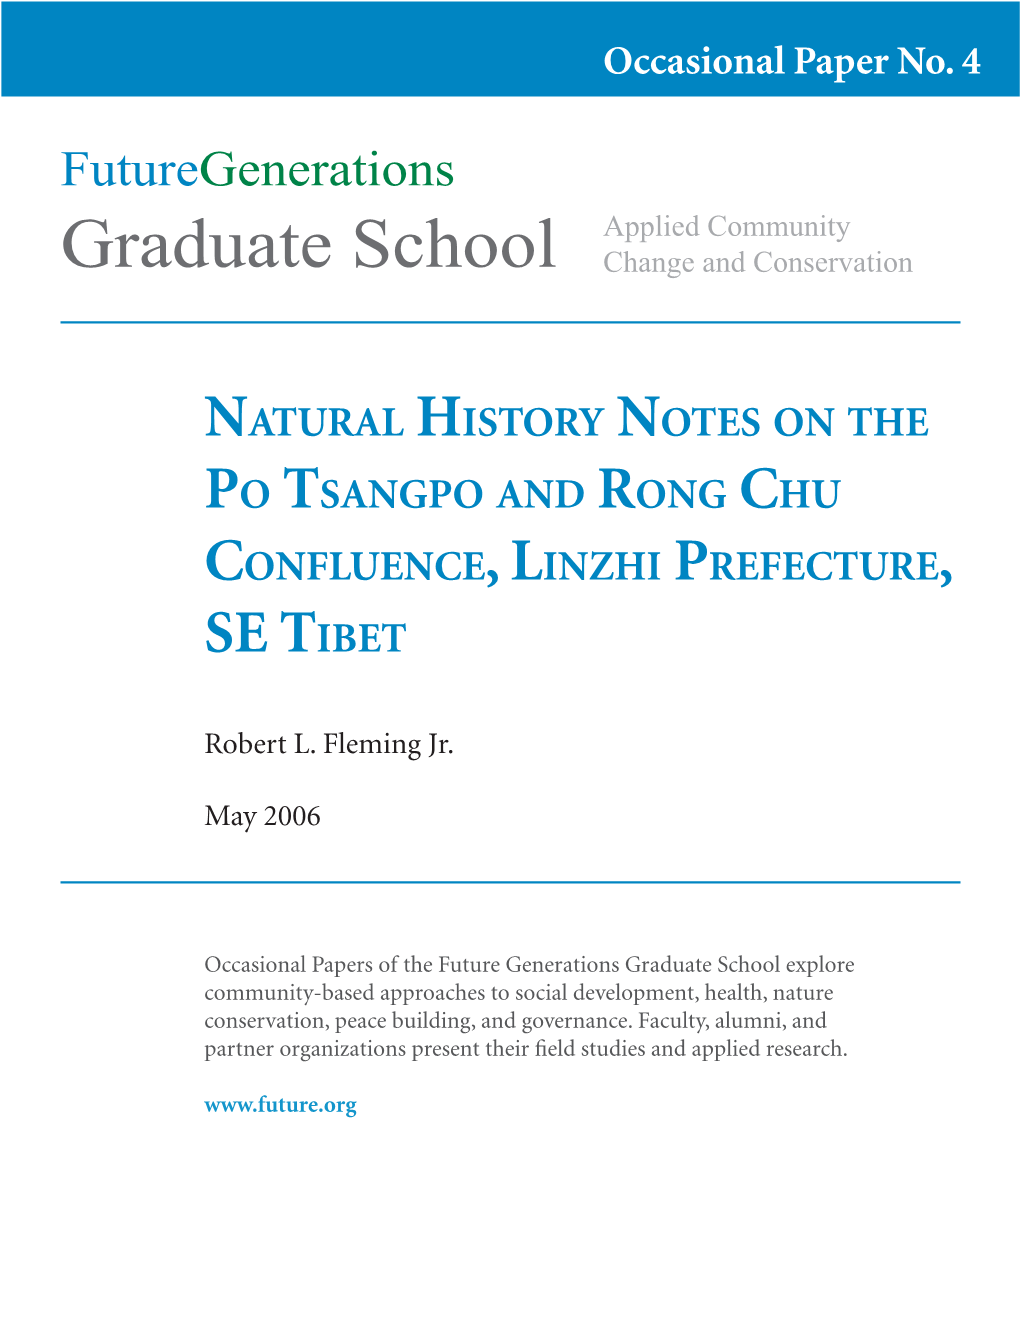 Natural History Notes on the Po Tsangpo and Rong Chu Confluence, Linzhi Prefecture, SE Tibet